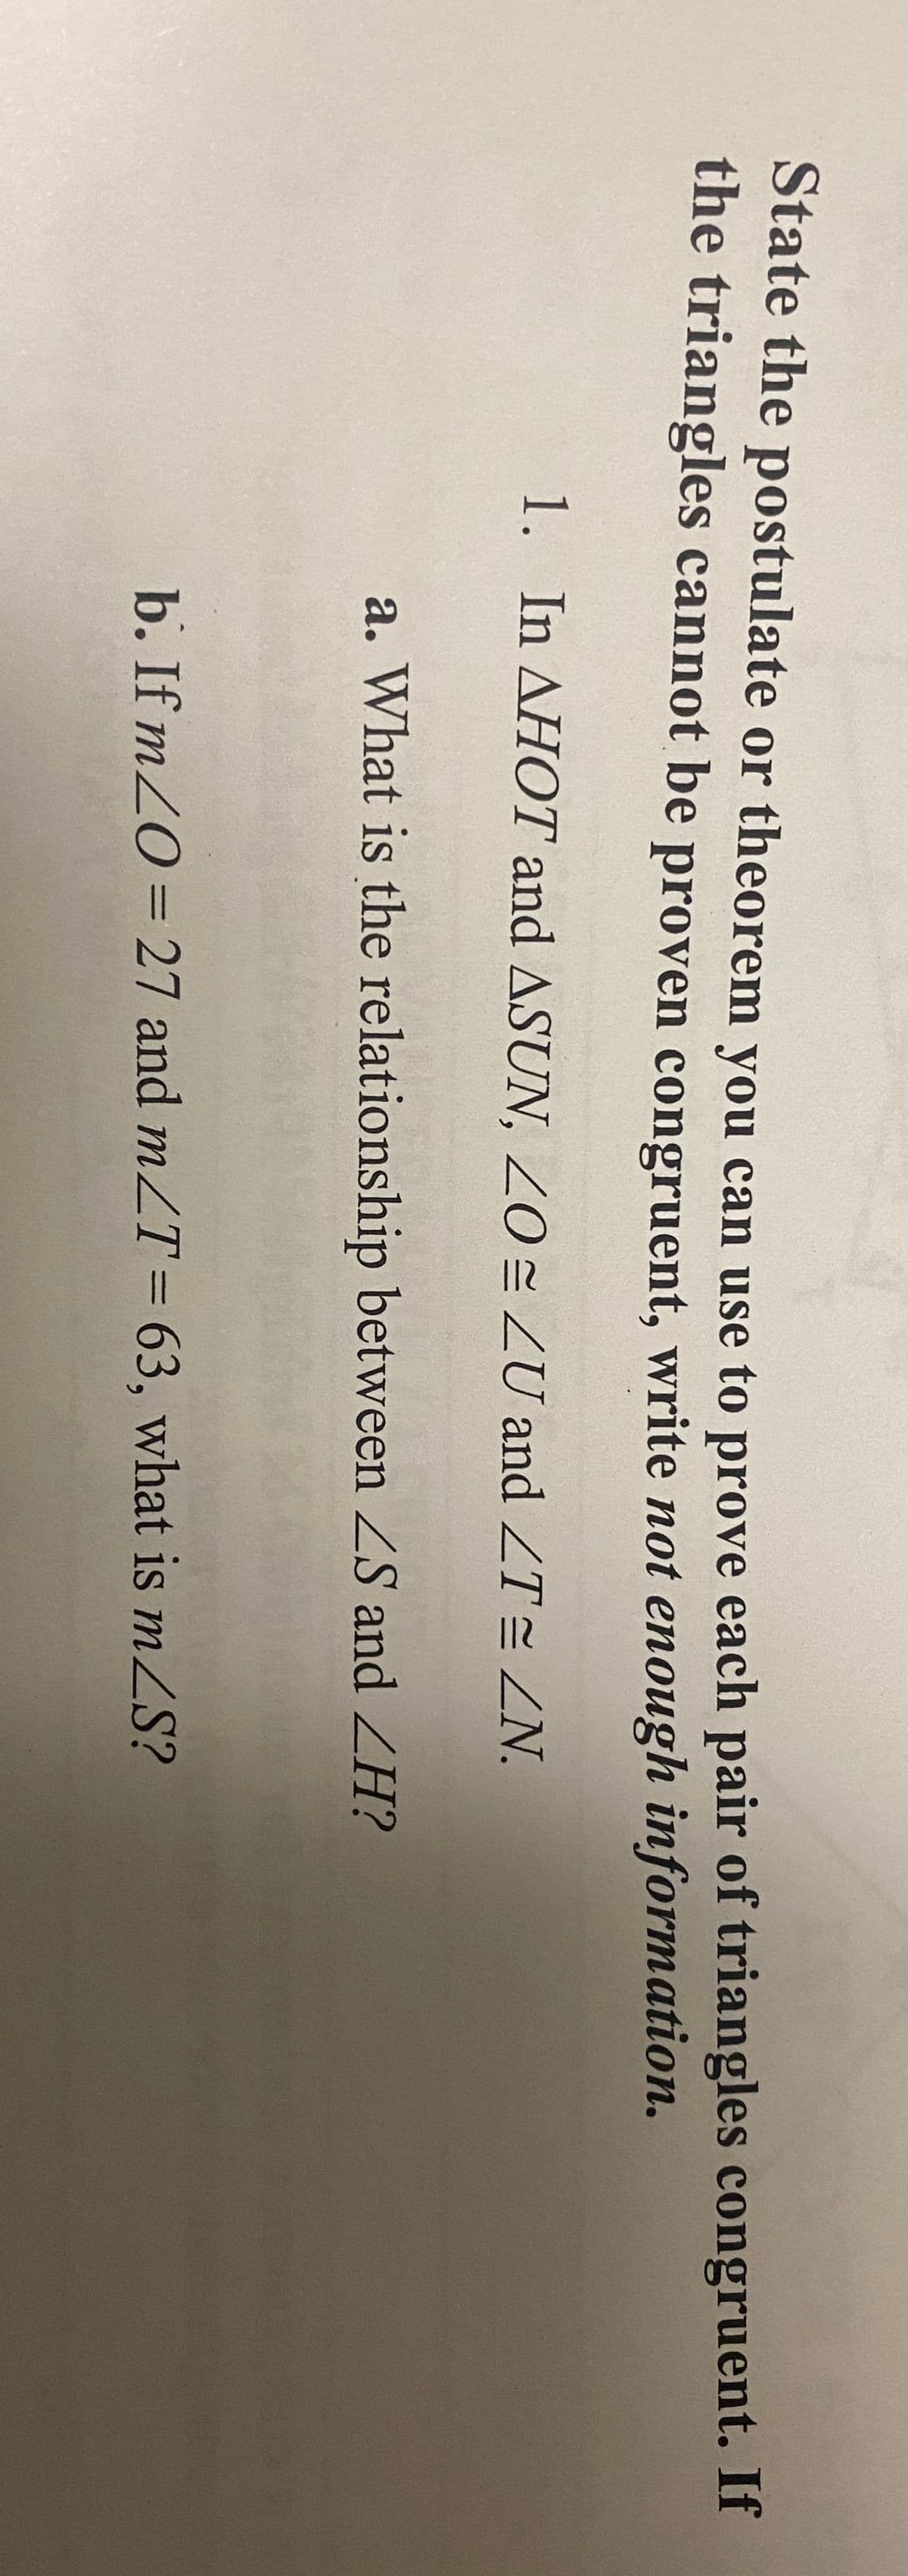 State the postulate or theorem vou can use to prove each pair of triangles congruent. If
the triangles cannot be proven congruent, write not enough information.
1. In AHOT and ASUN, Z0 = ZU and ZT= ZN.
a. What is the relationship between ZS and ZH?
b. If m20=27 and mZT= 63, what is mZS?
